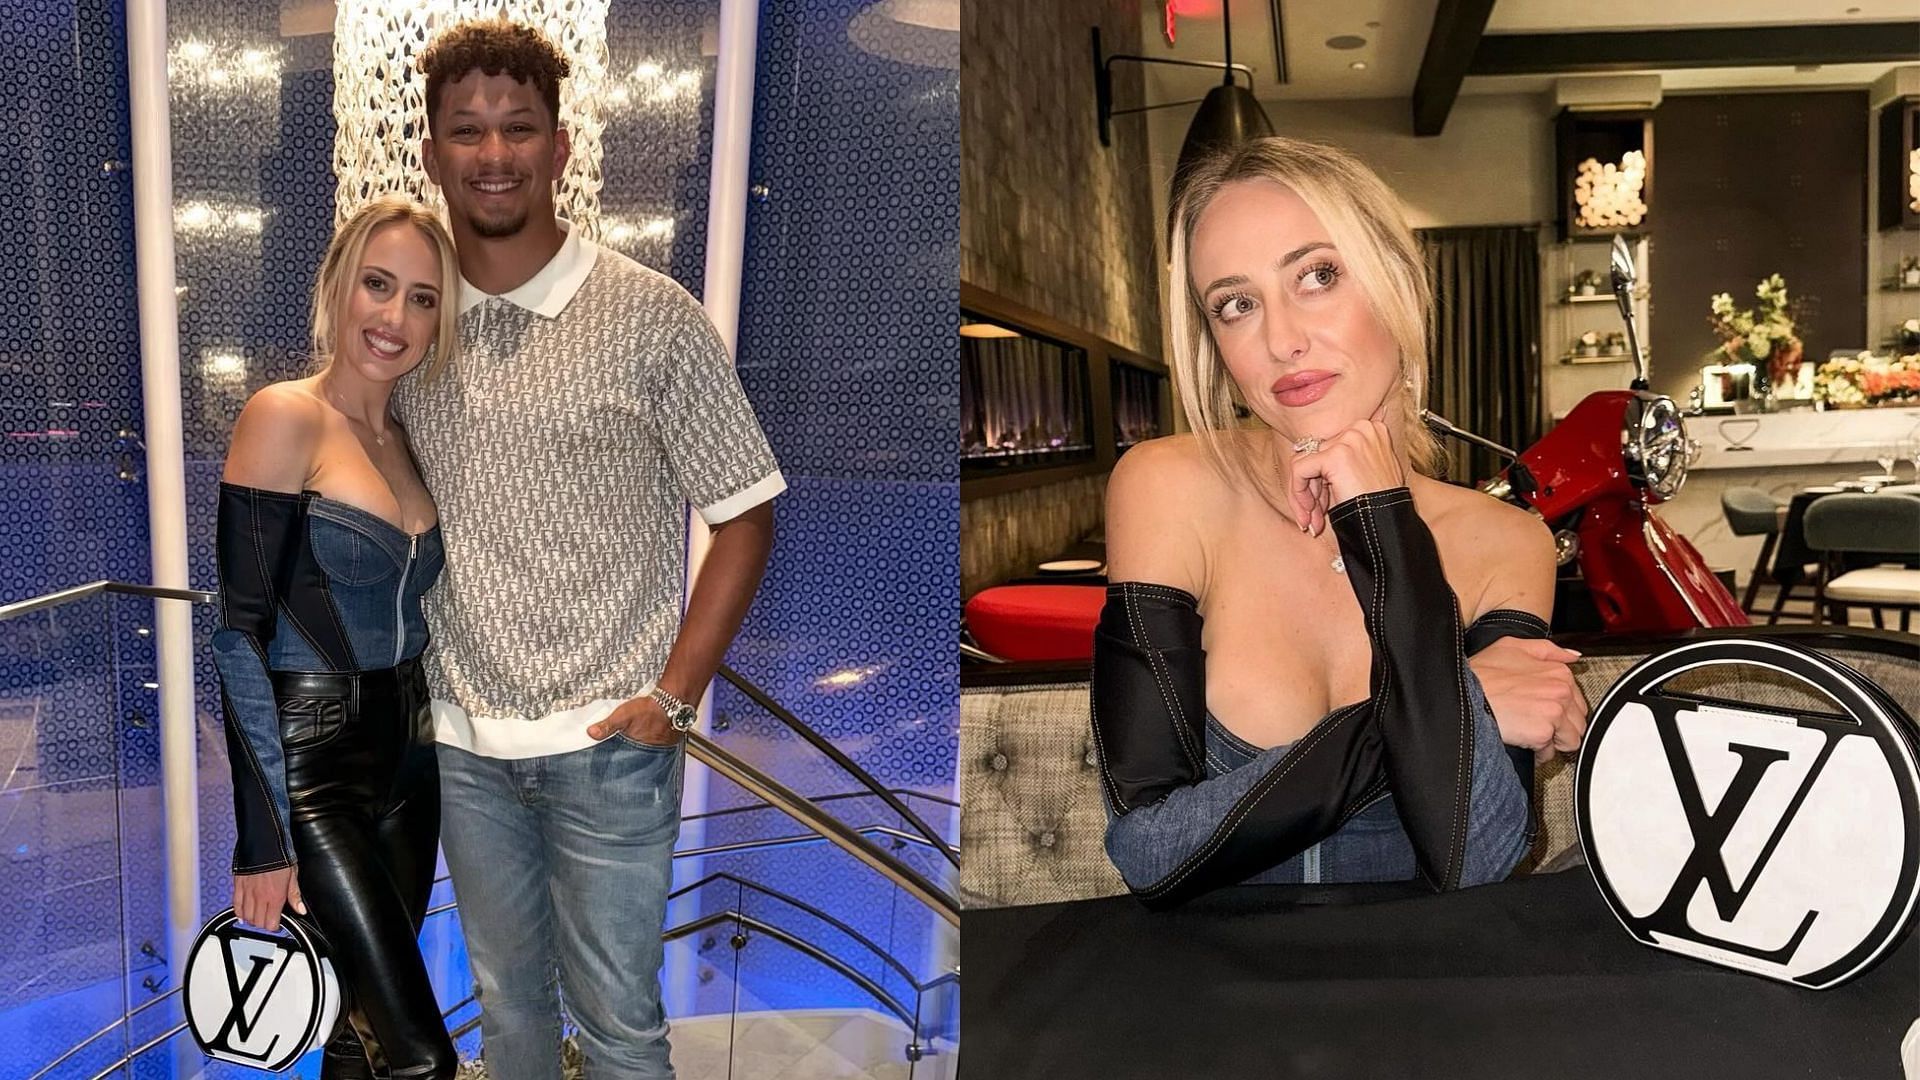 IN PHOTOS: Brittany and Patrick Mahomes stun in $10,190 Louis Vuitton, Dior outfit for romantic date night